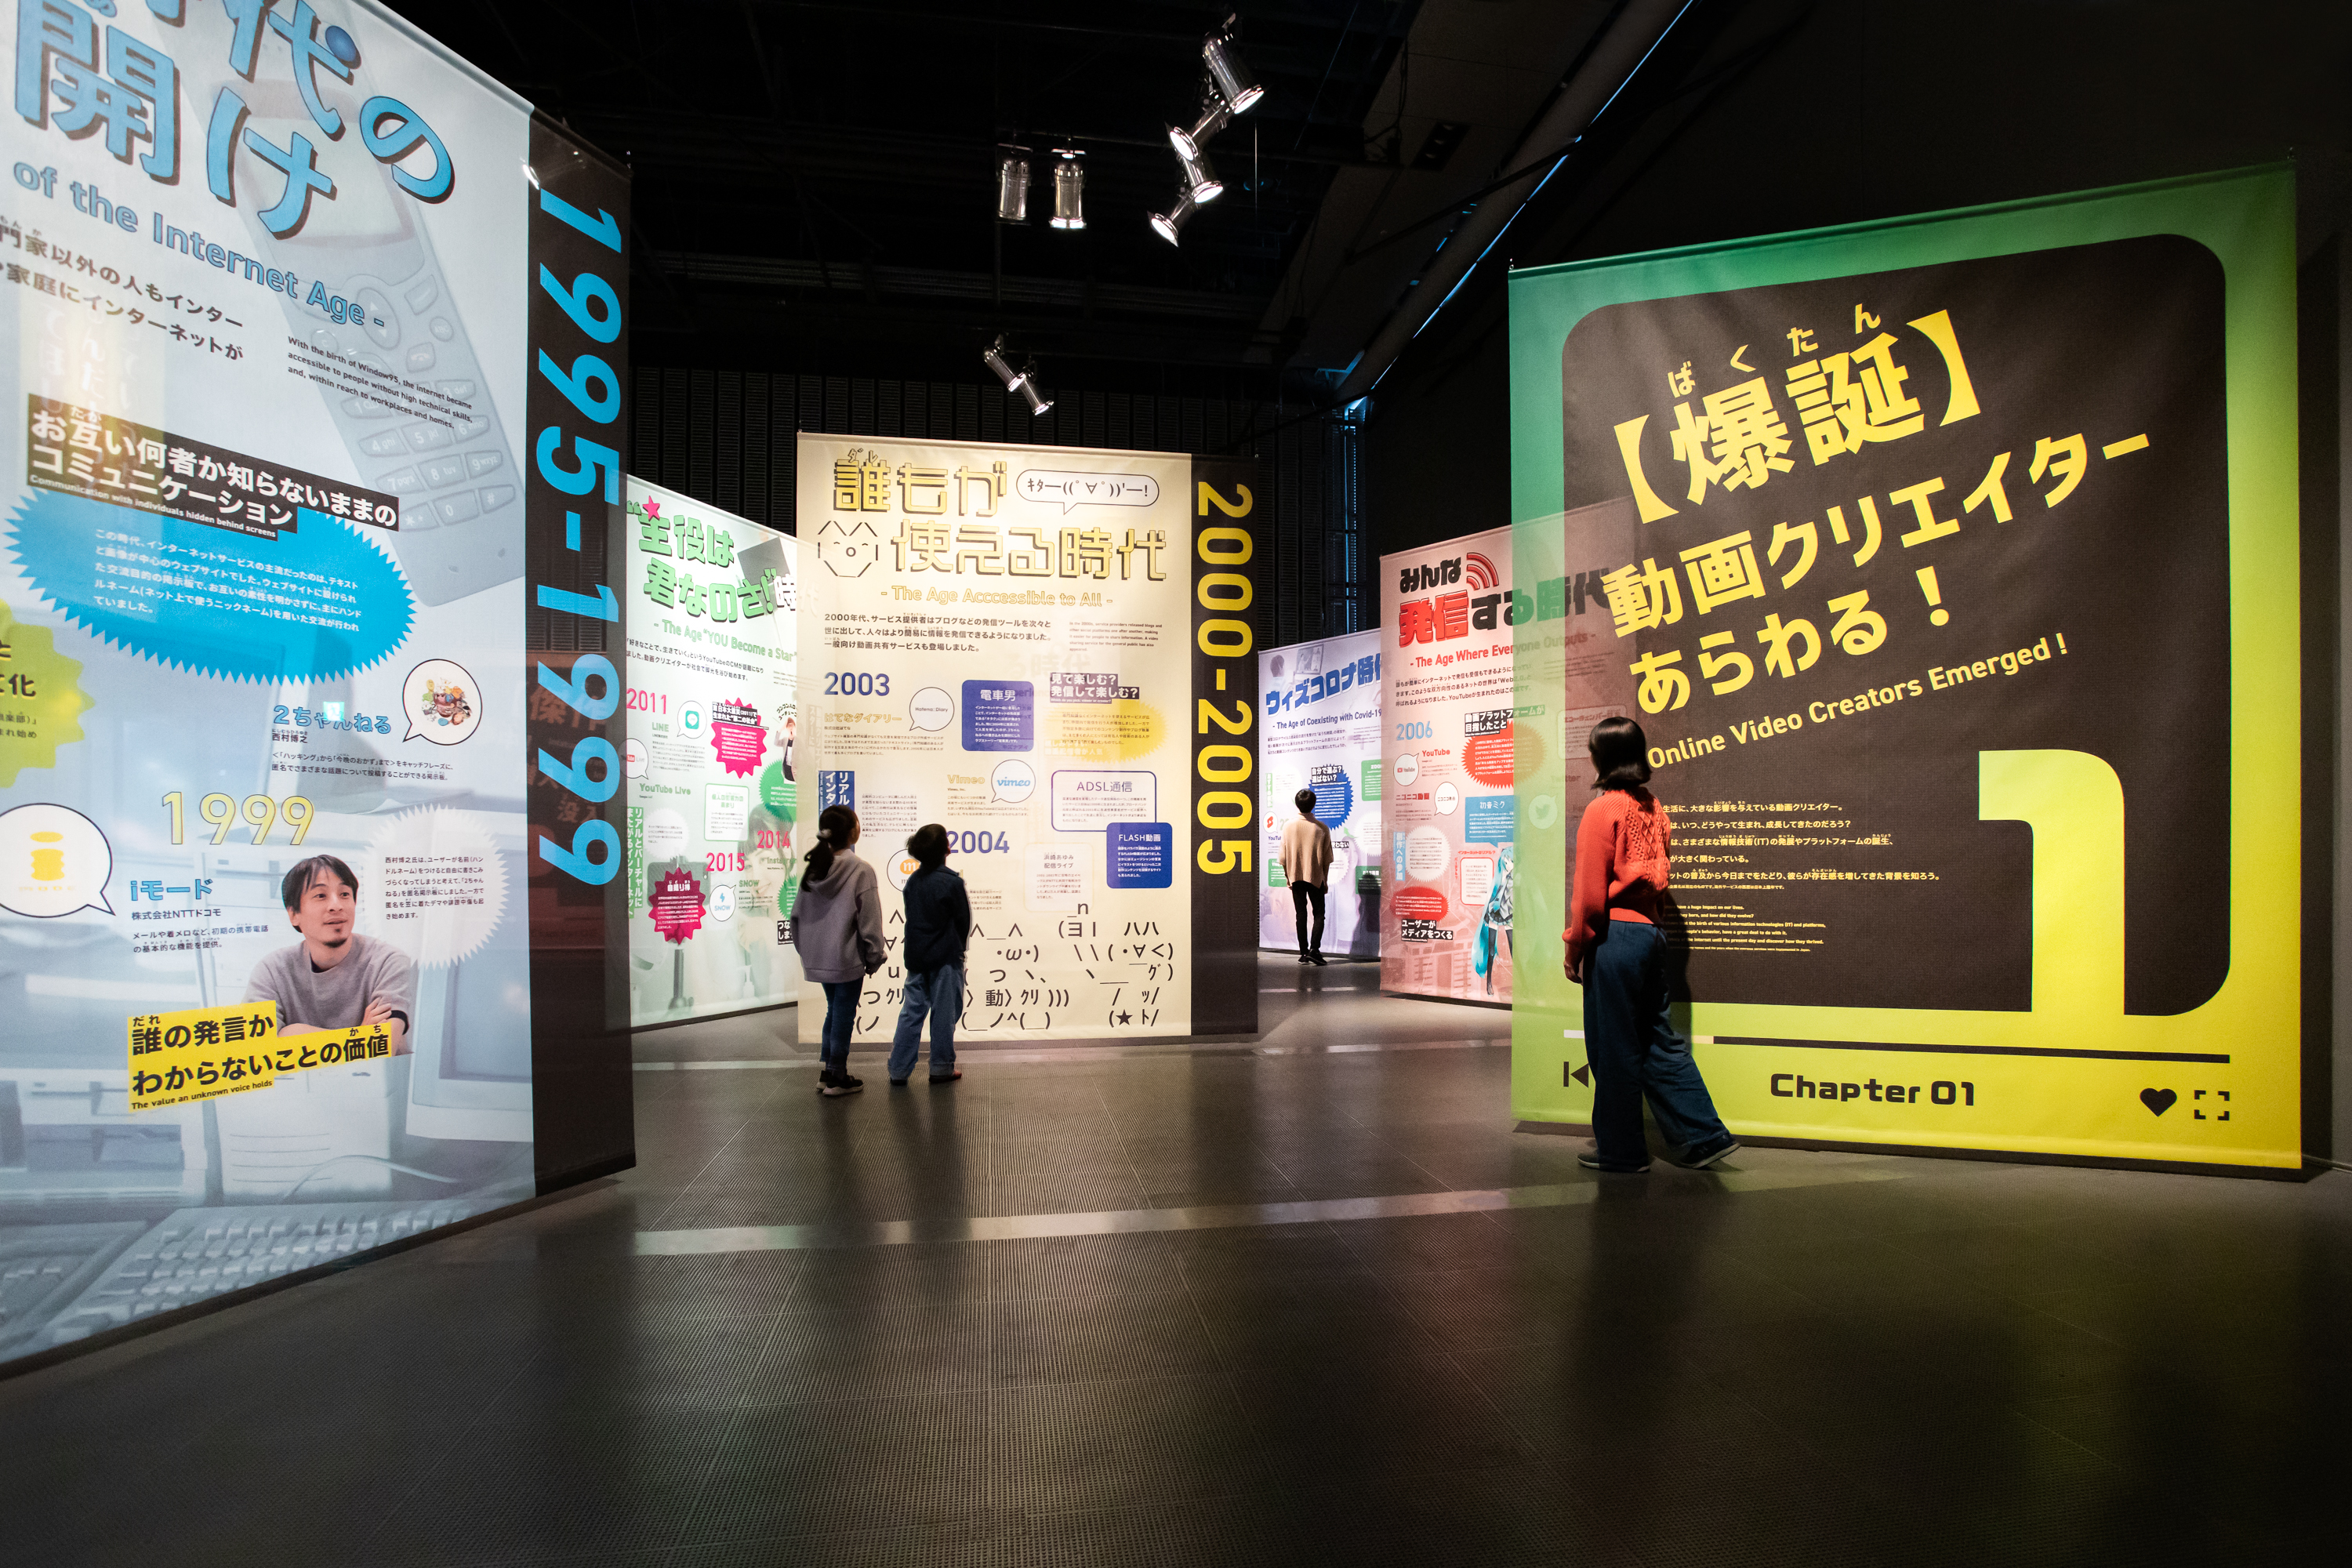 Special Exhibition "Online Video Creators" at Miraikan, Tokyo Admission E-ticket <Available on the day of purchase>